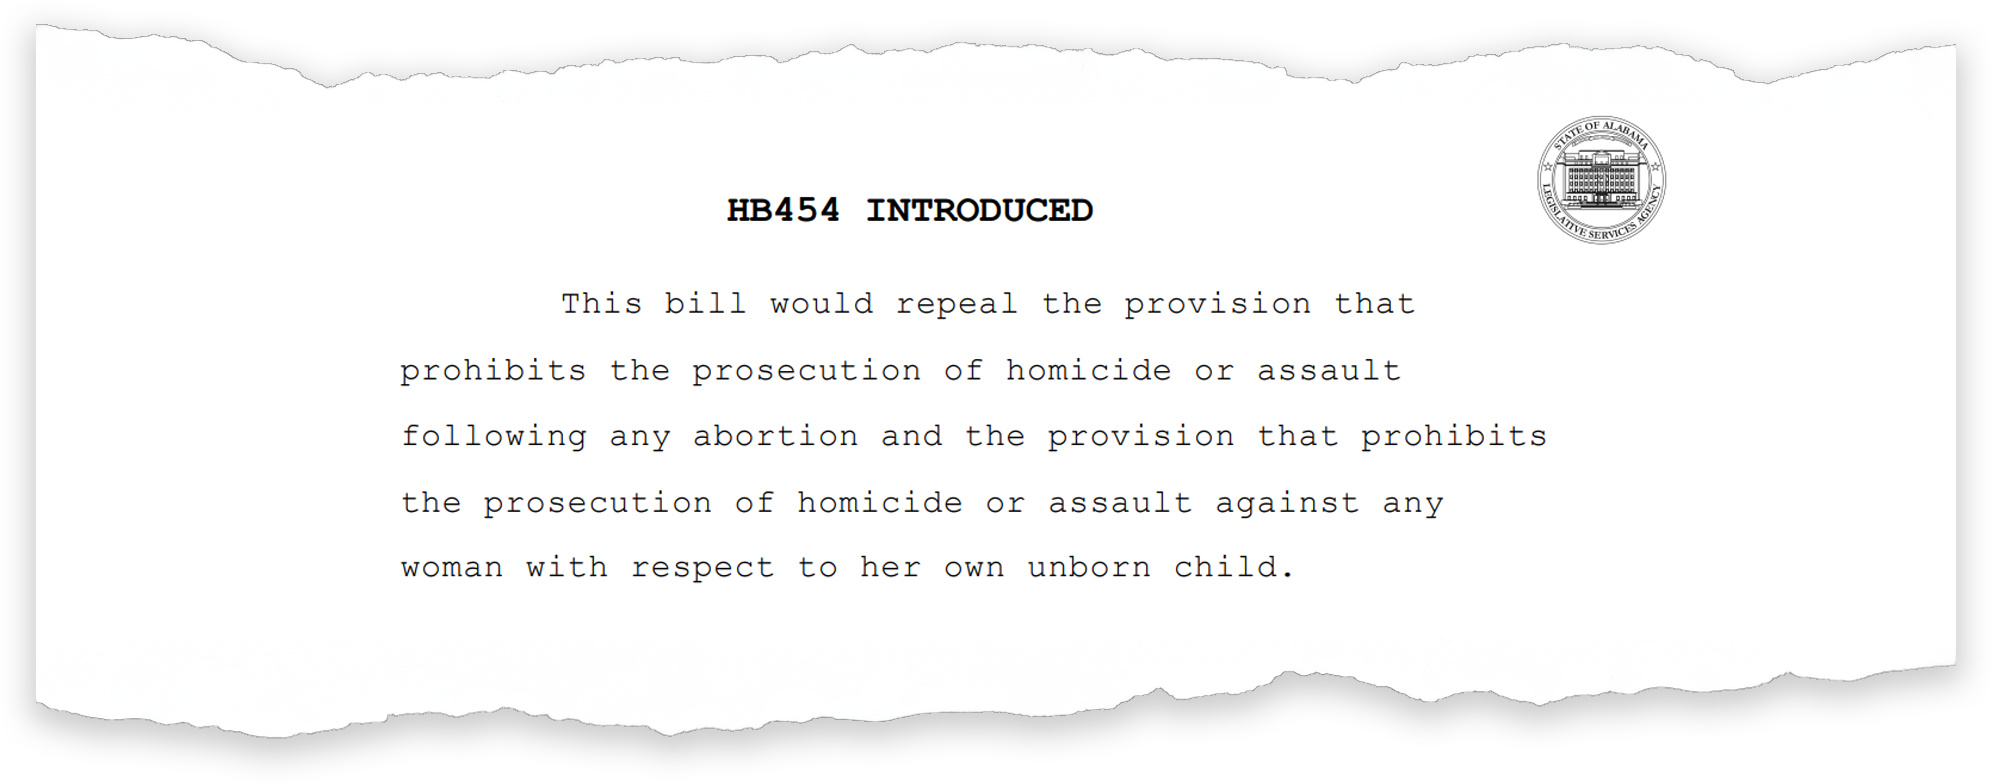 A bill introduced in the Alabama Legislature would have made abortion subject to homicide penalties.